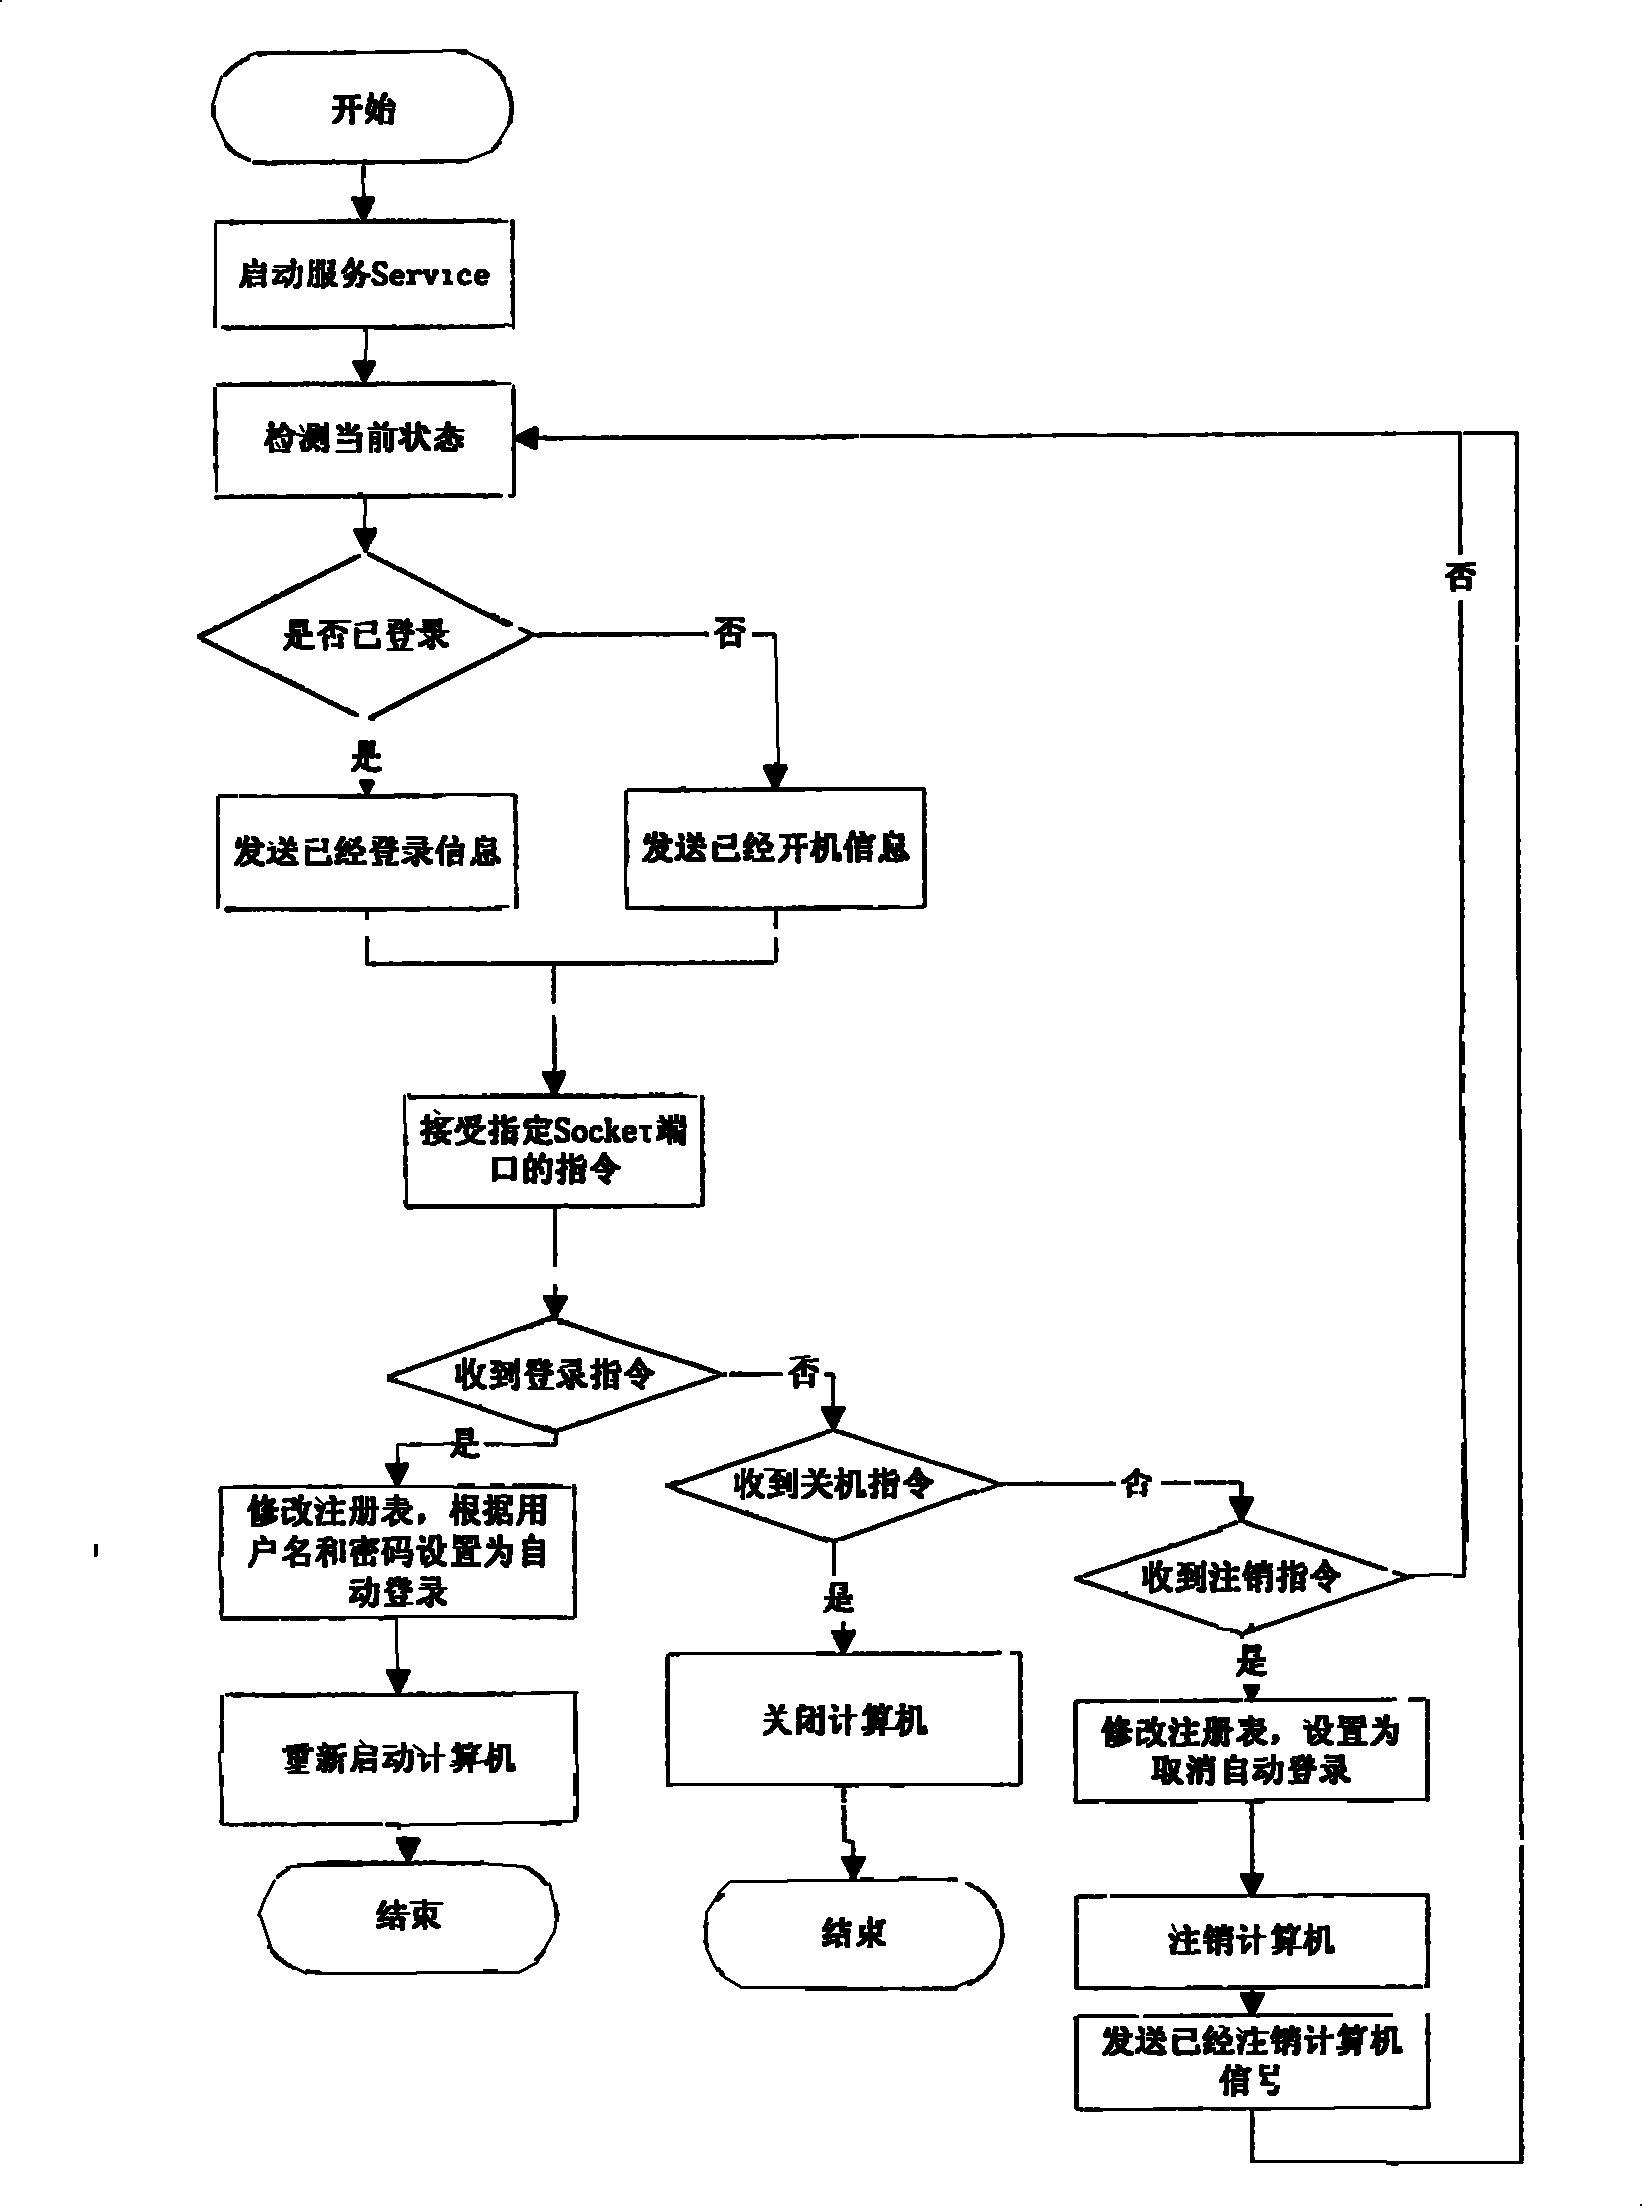 Method of remote controlling computer in different area via computer network